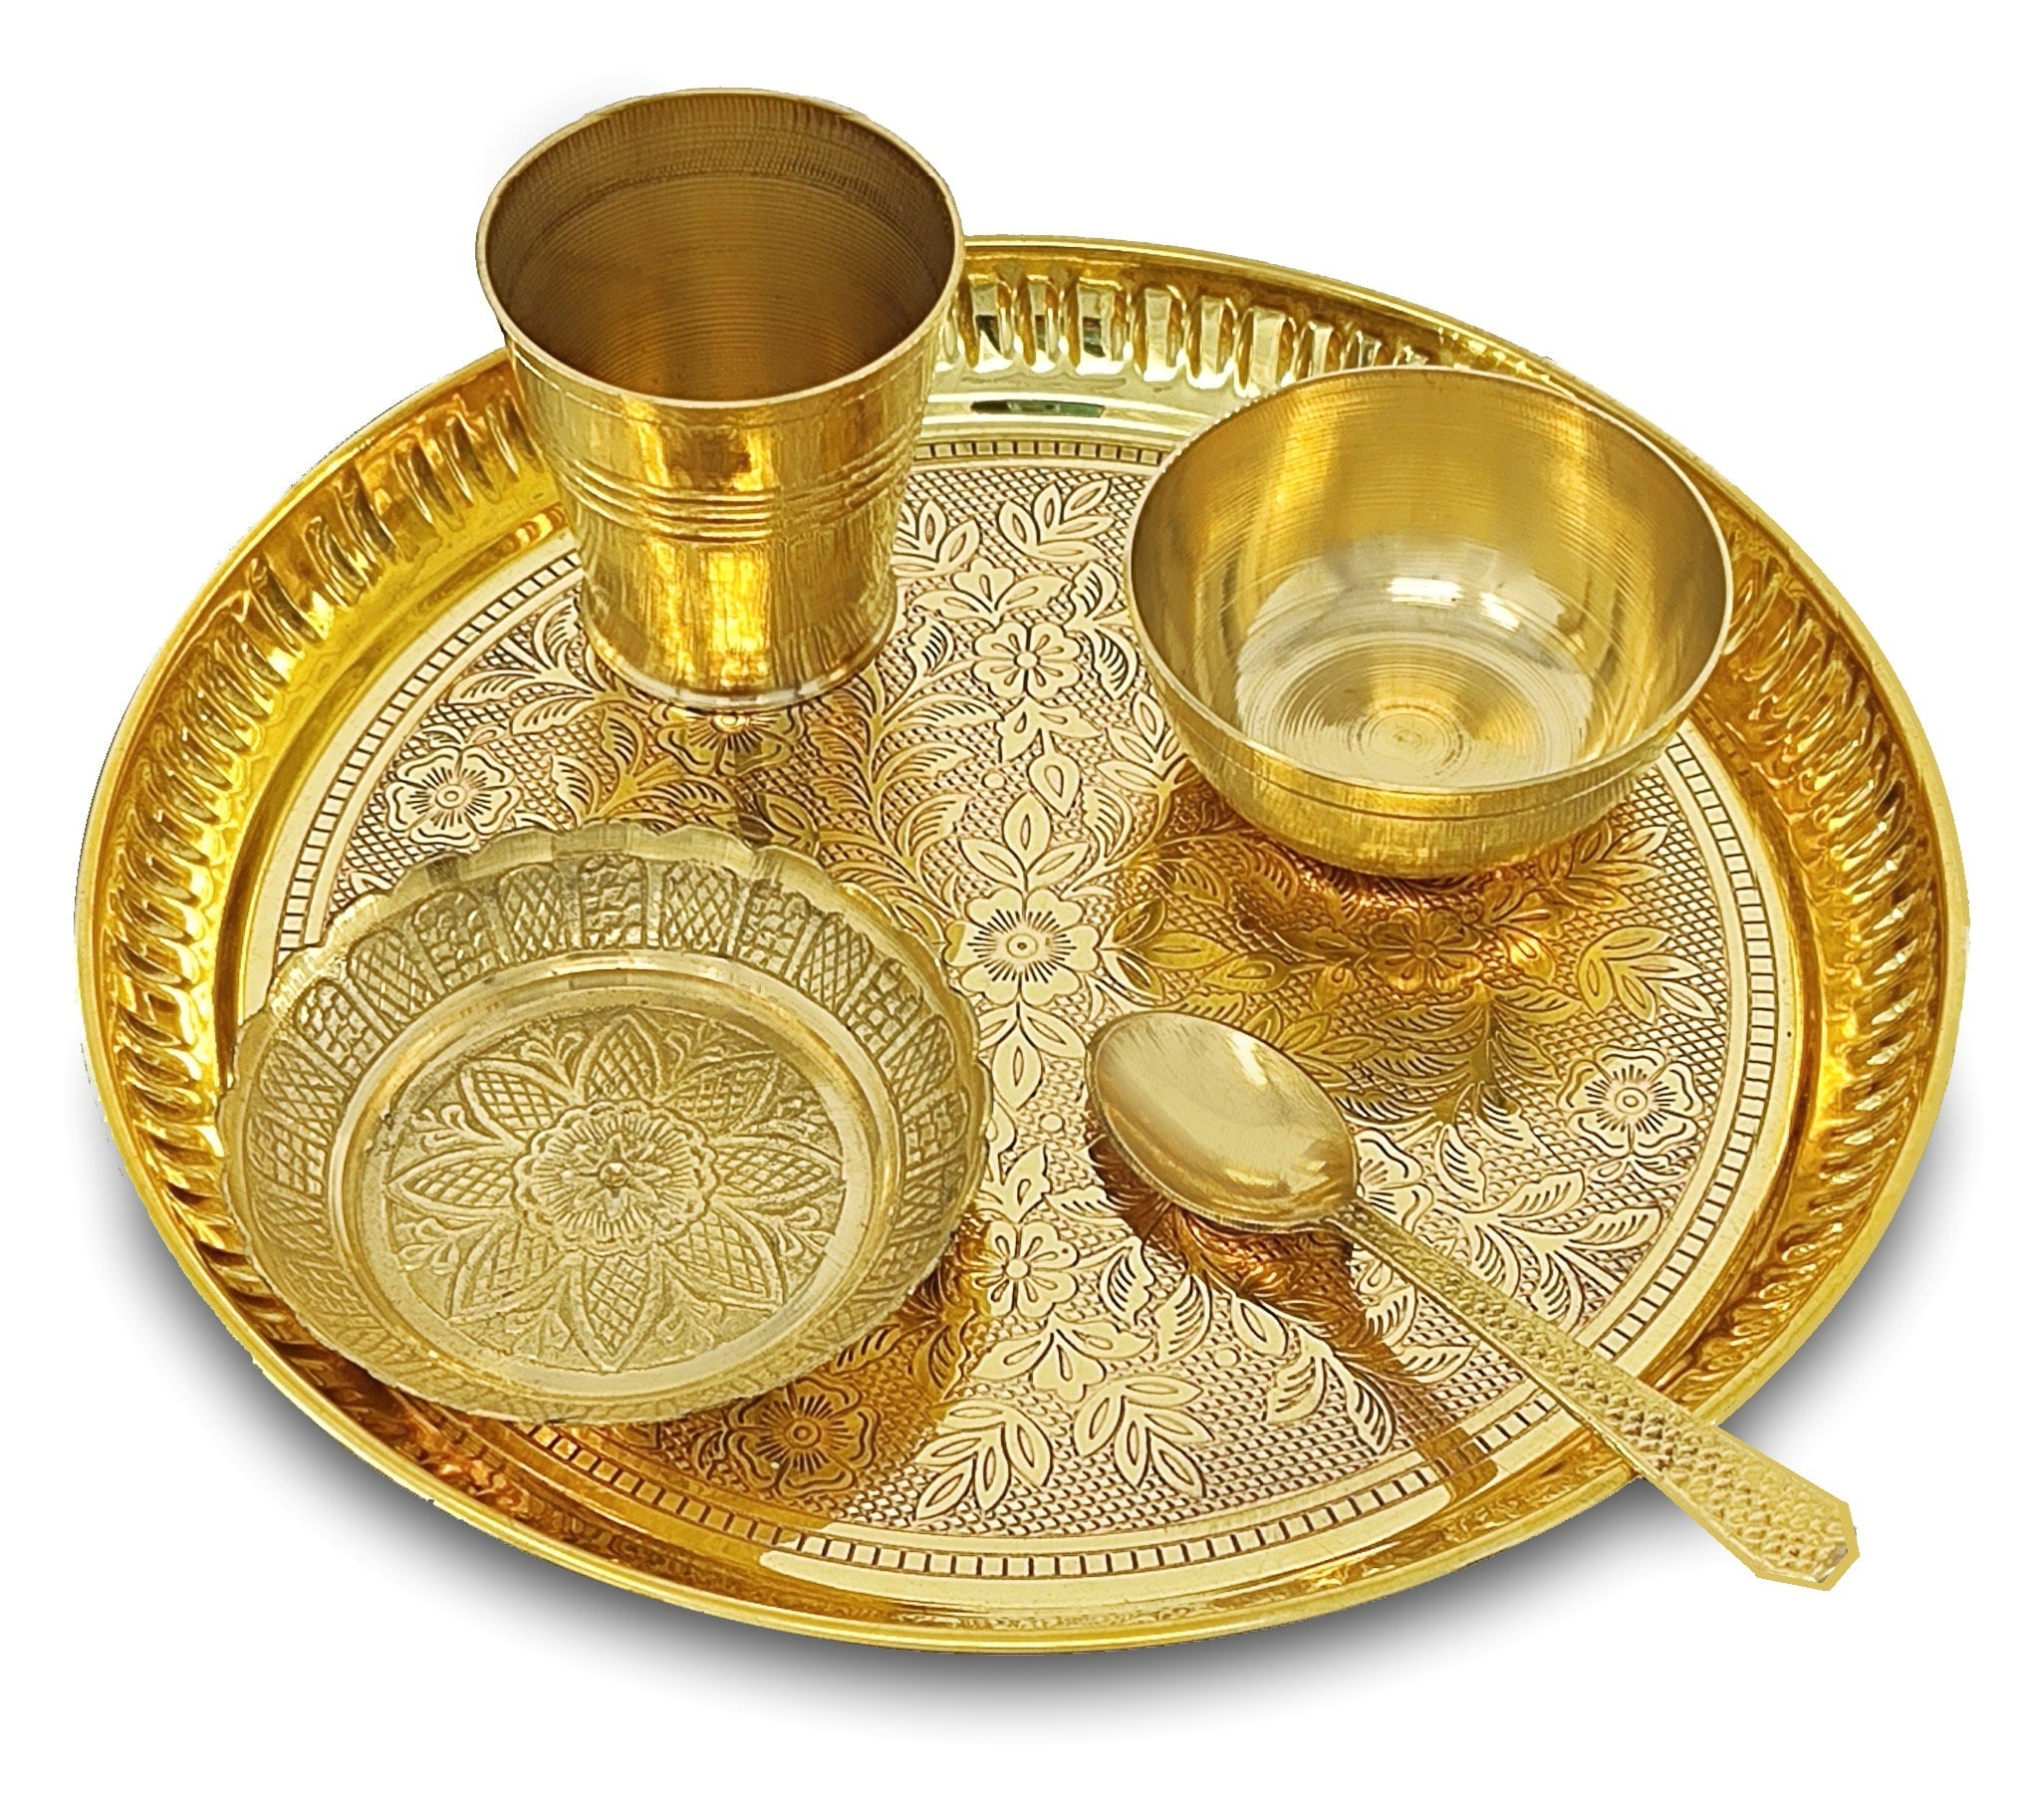 BENGALEN Brass Pooja Thali Set 8 Inch Puja Thali with Pital Plate and Accessories Arti Thali for Diwali Home Office Mandir Wedding Return Gift Items